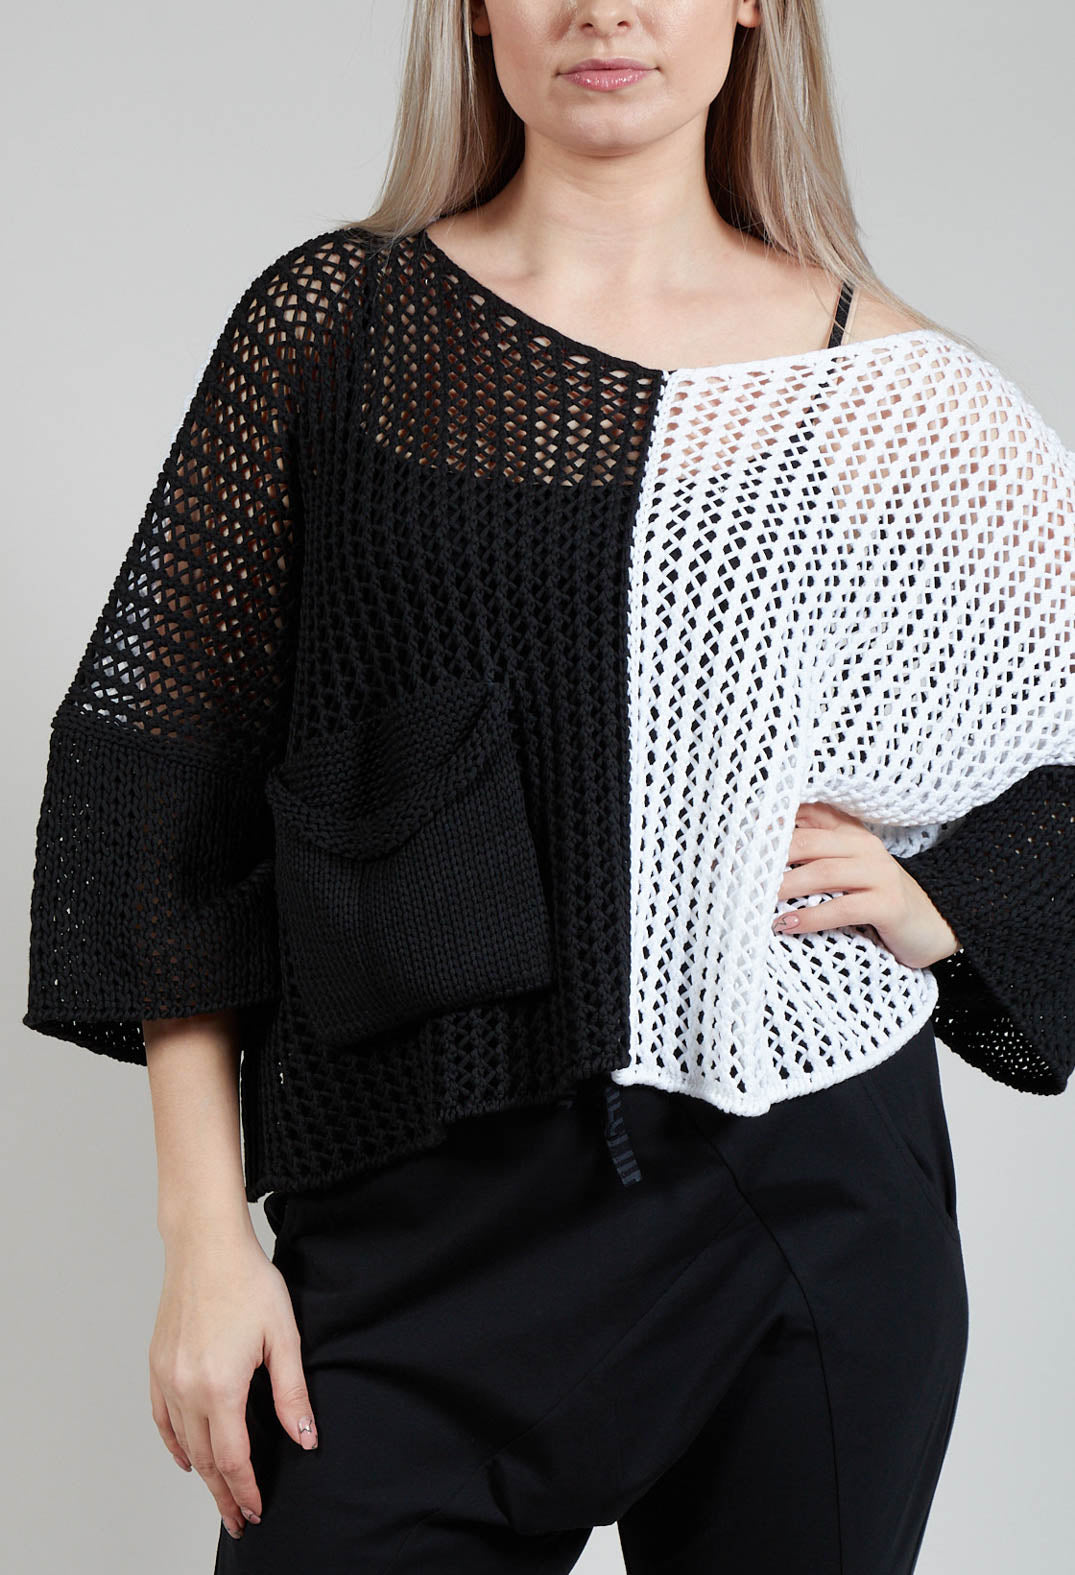 Crocheted Top in Black and White